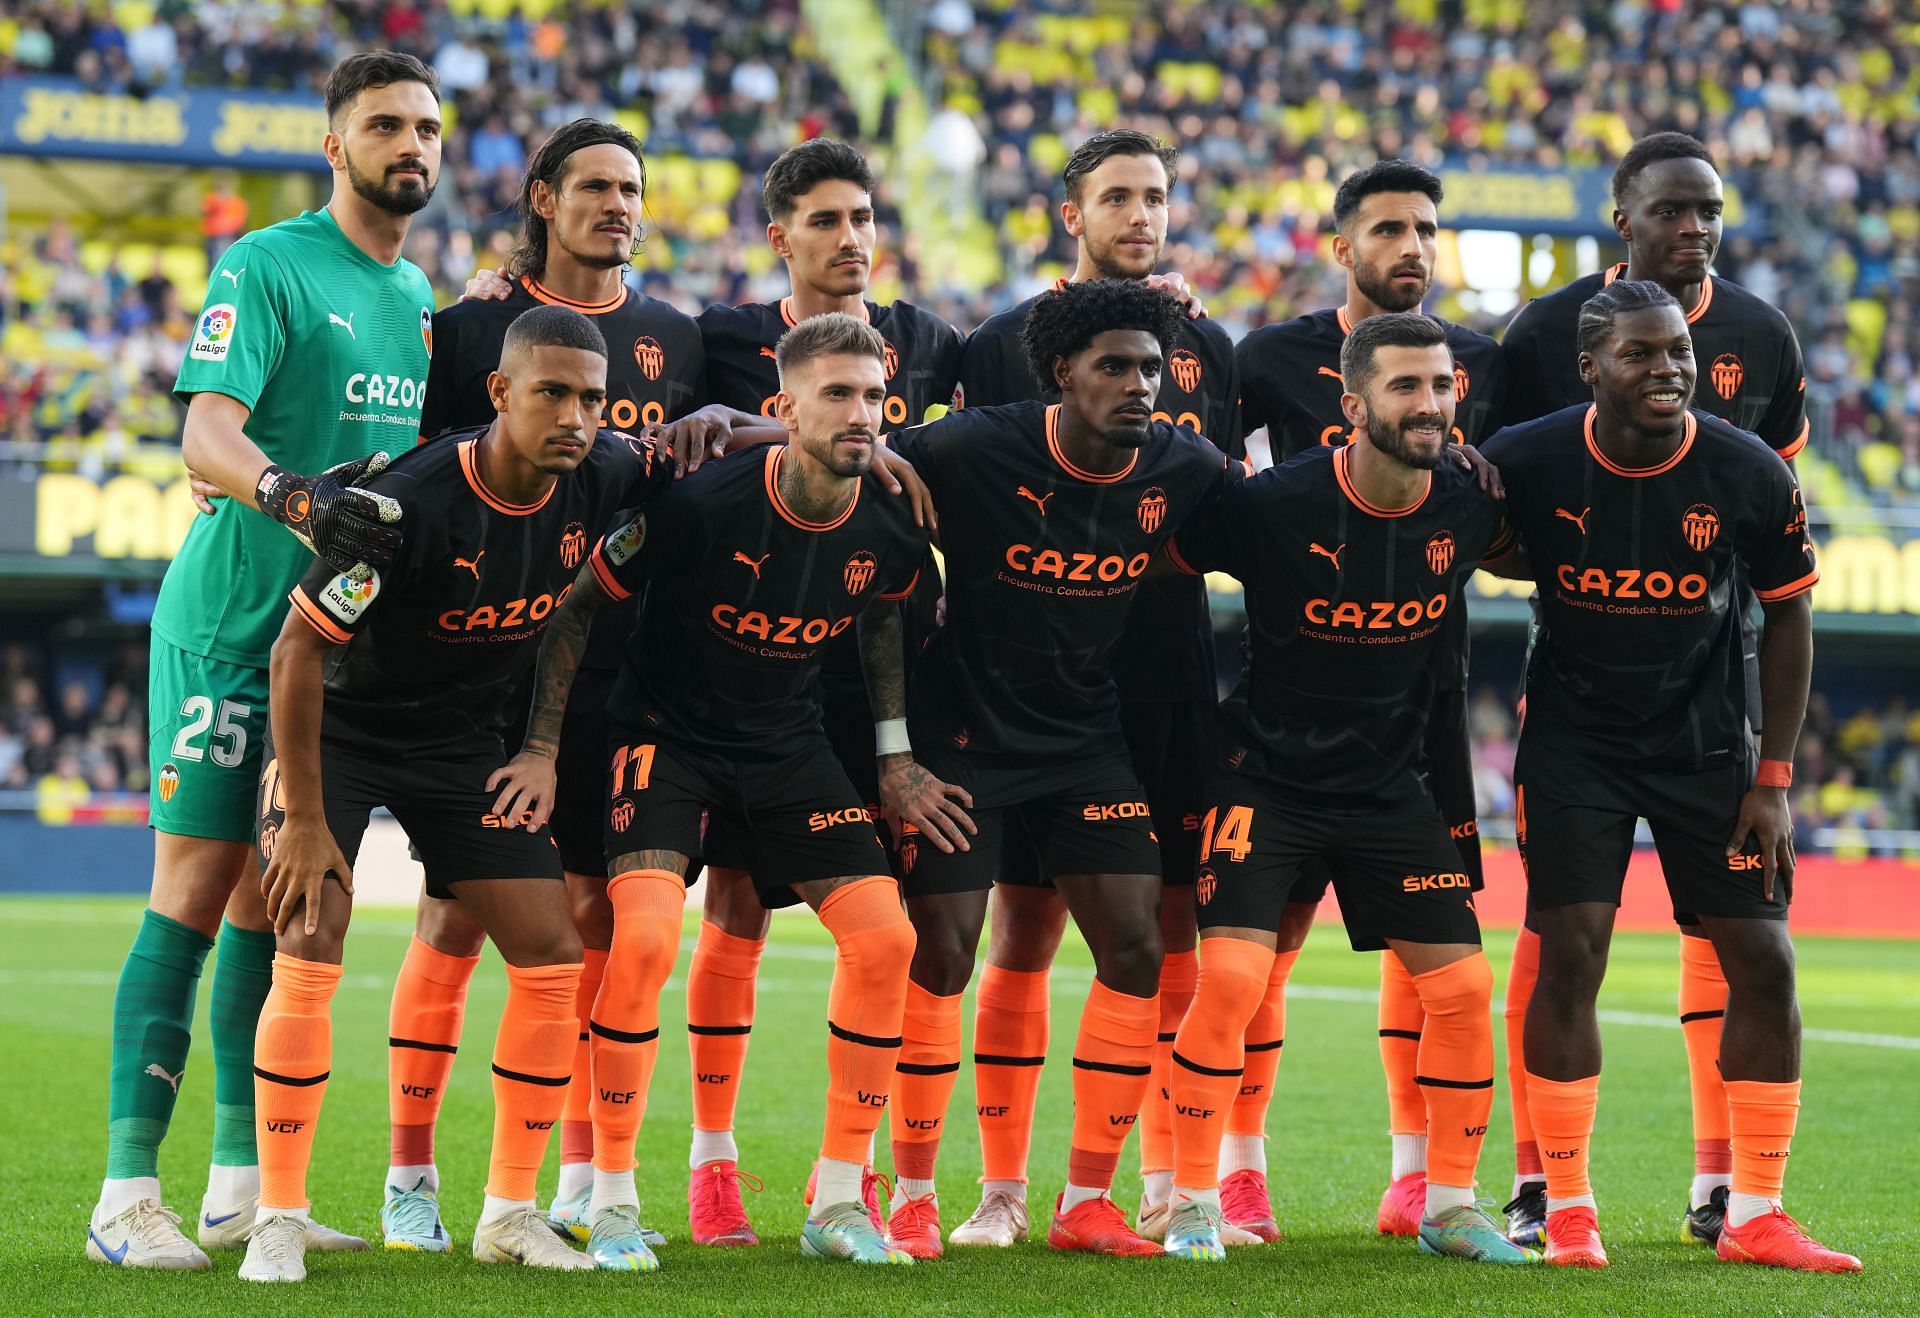 Calendar and Upcoming Matches of the Valencia CF